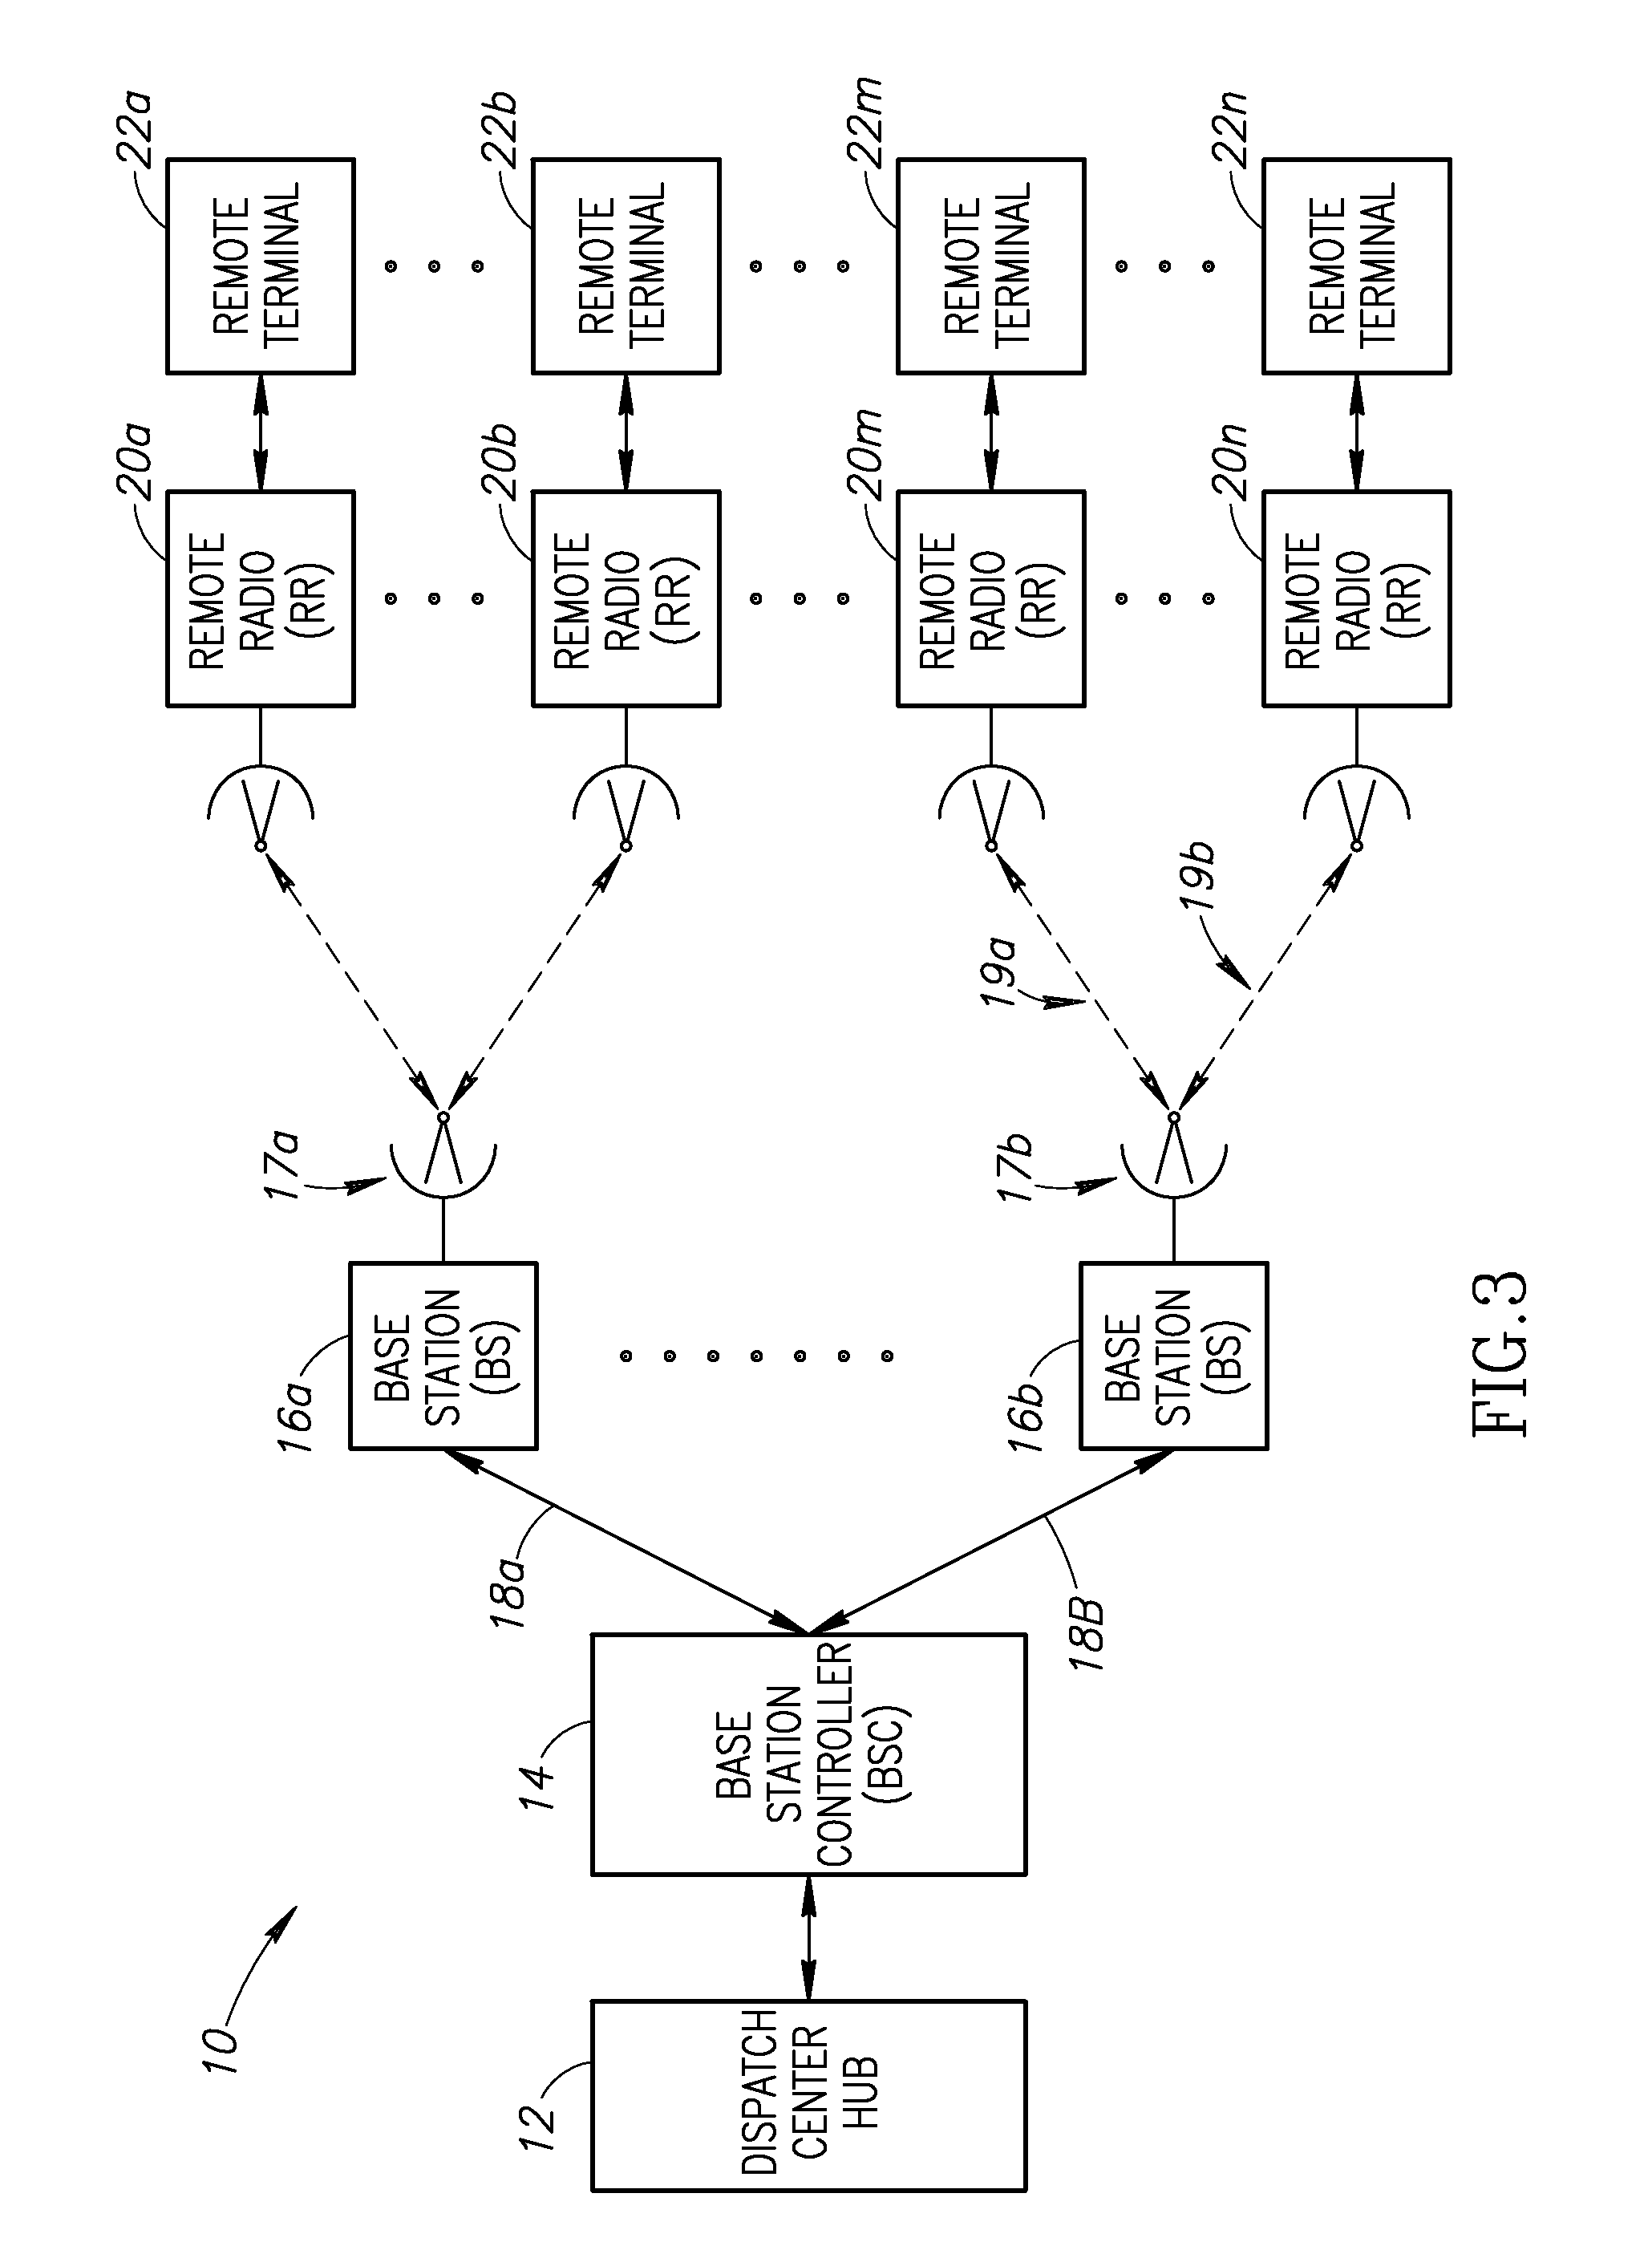 System and method for the delivery of high speed data services over dedicated and non-dedicated private land mobile radio (PLMR) channels using cognitive radio technology